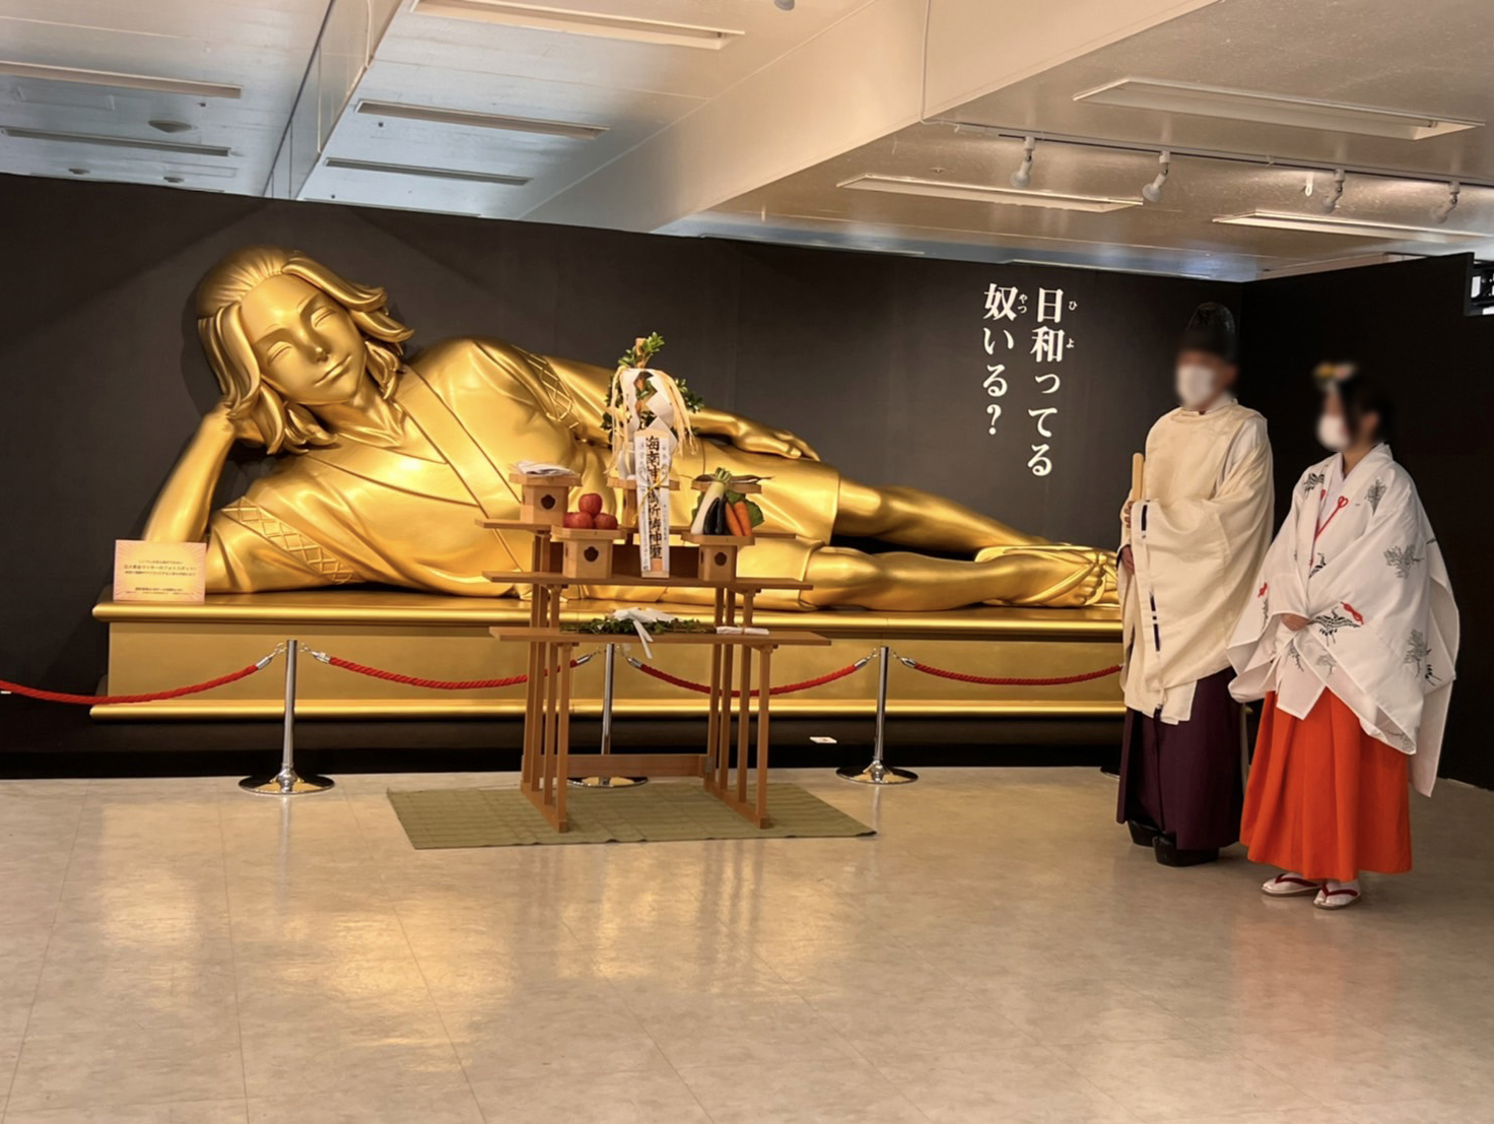 Tokyo Revengers Exhibition Becomes a Power Spot!? The Divine “Golden Mikey Statue” Makes an Appearance!